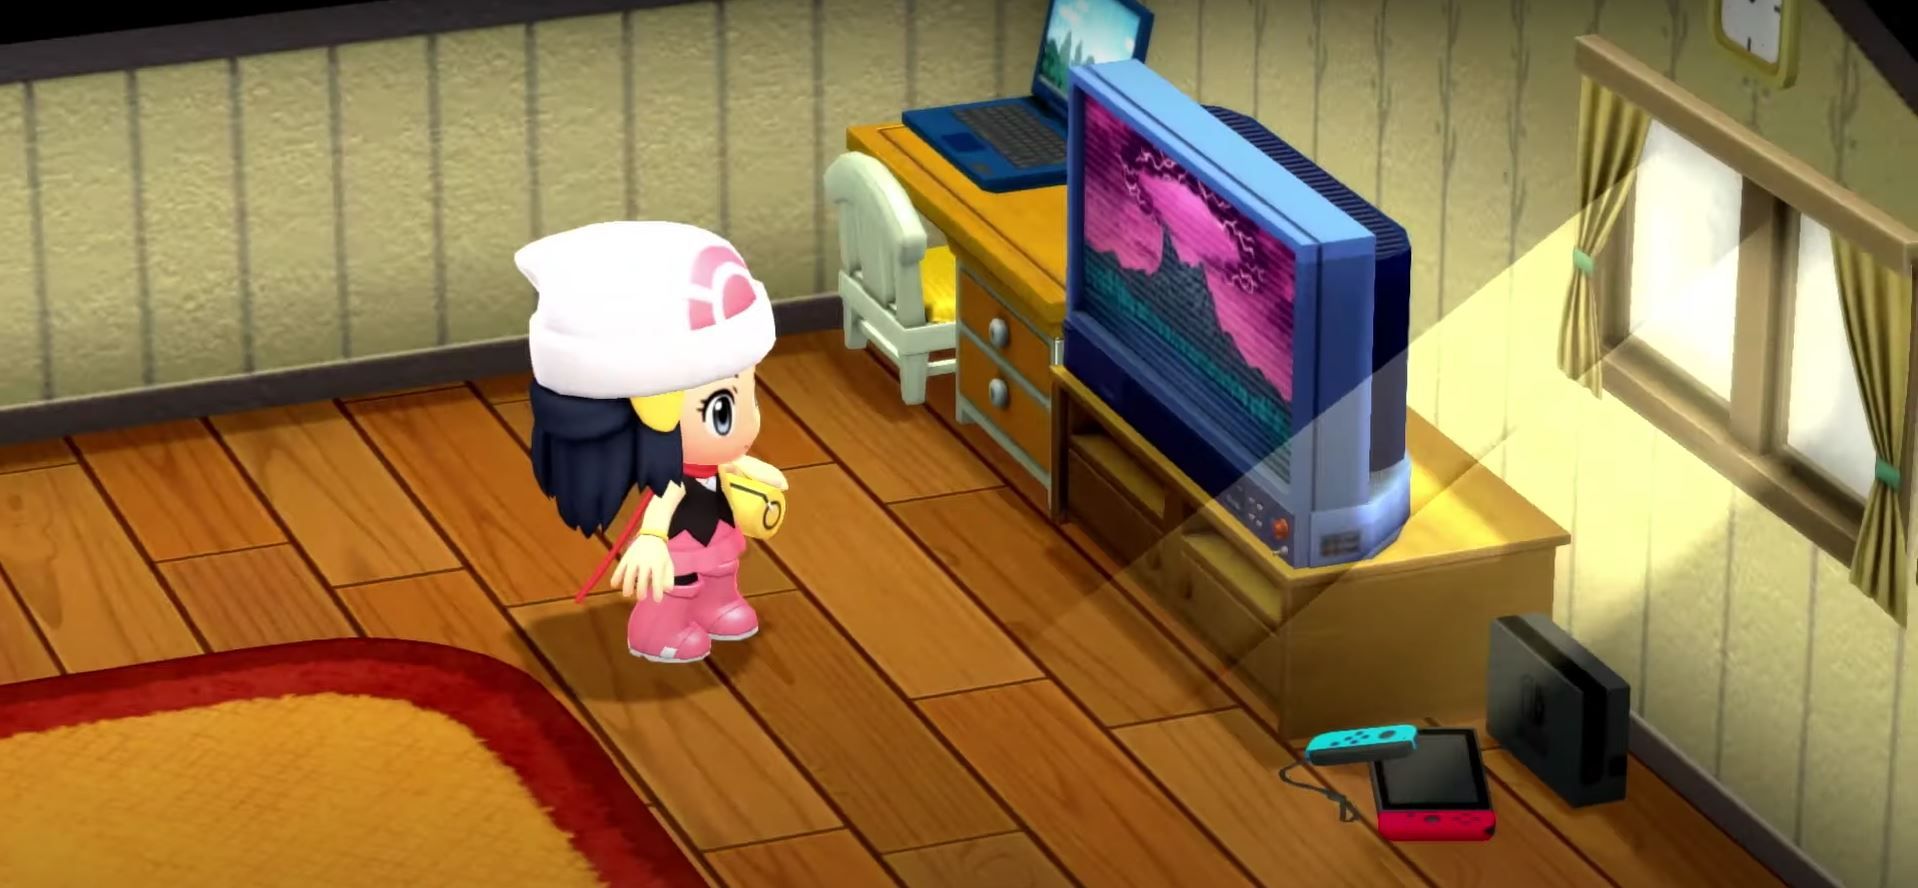 Pokemon Diamond And Pearl' remakes announced for Nintendo Switch